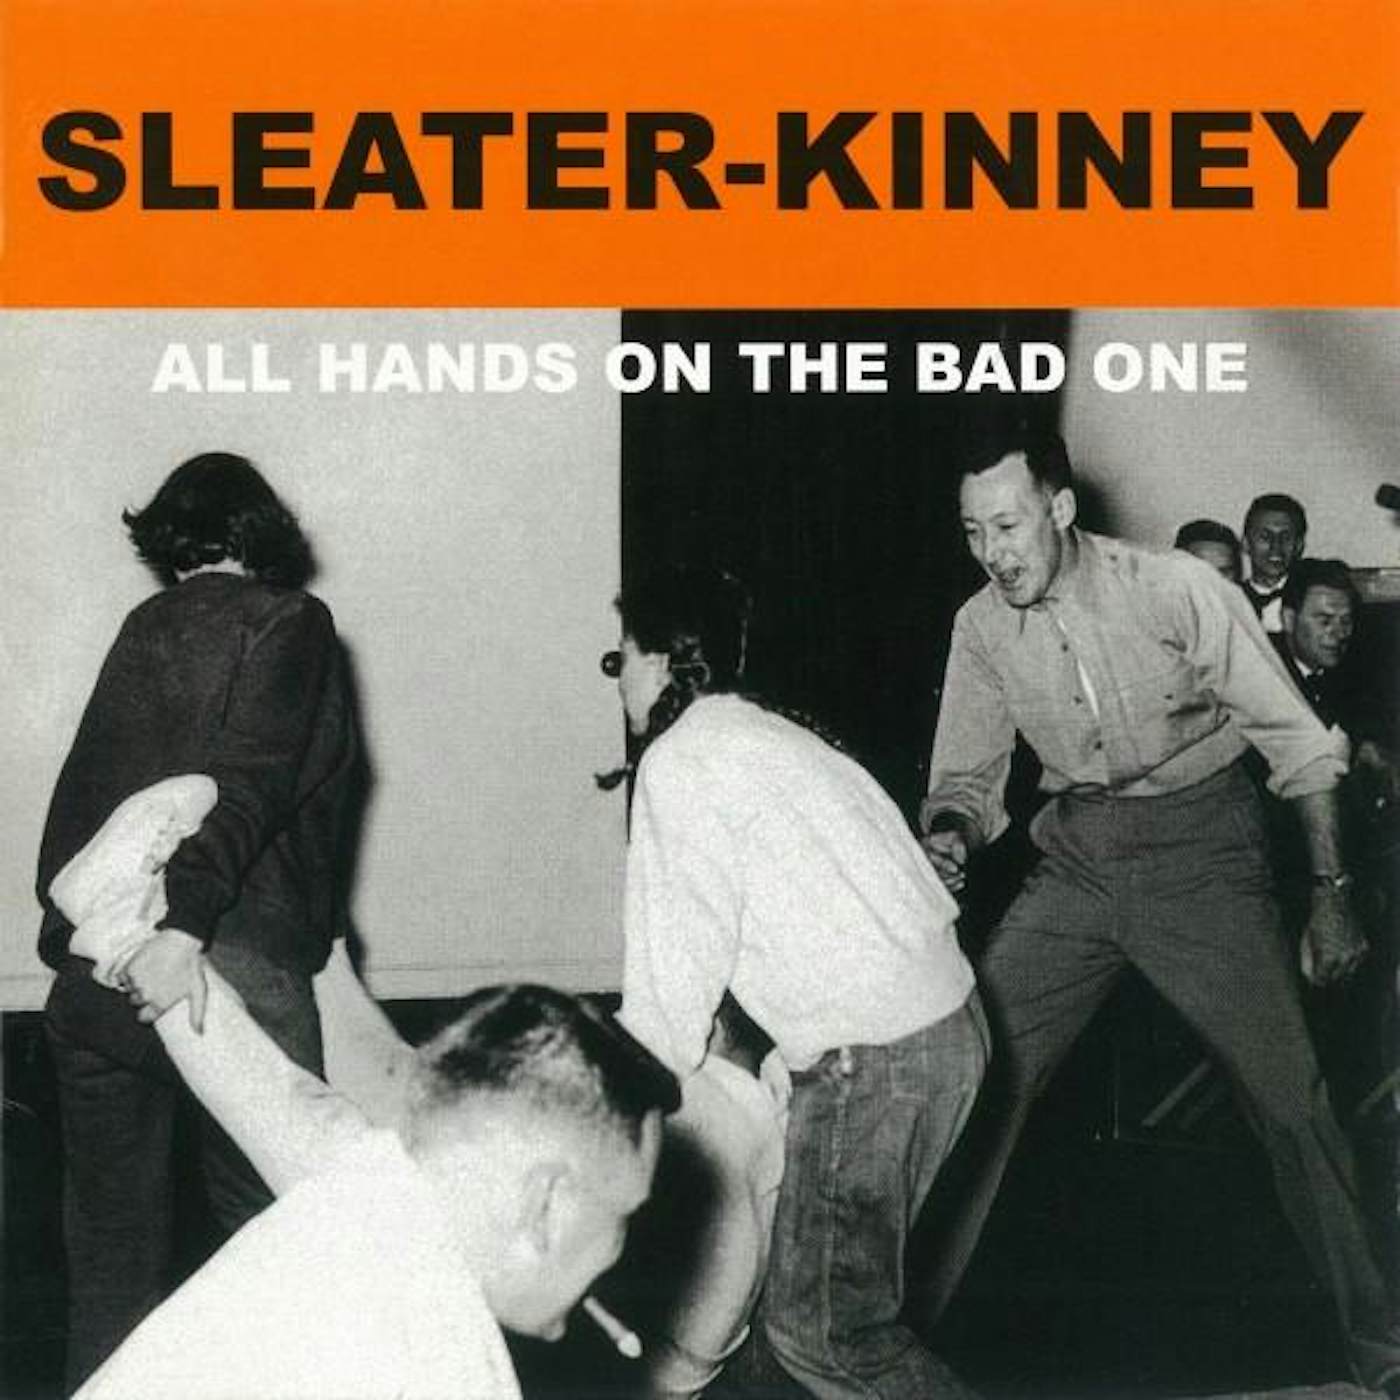 Sleater-Kinney All Hands On The Bad One Vinyl Record